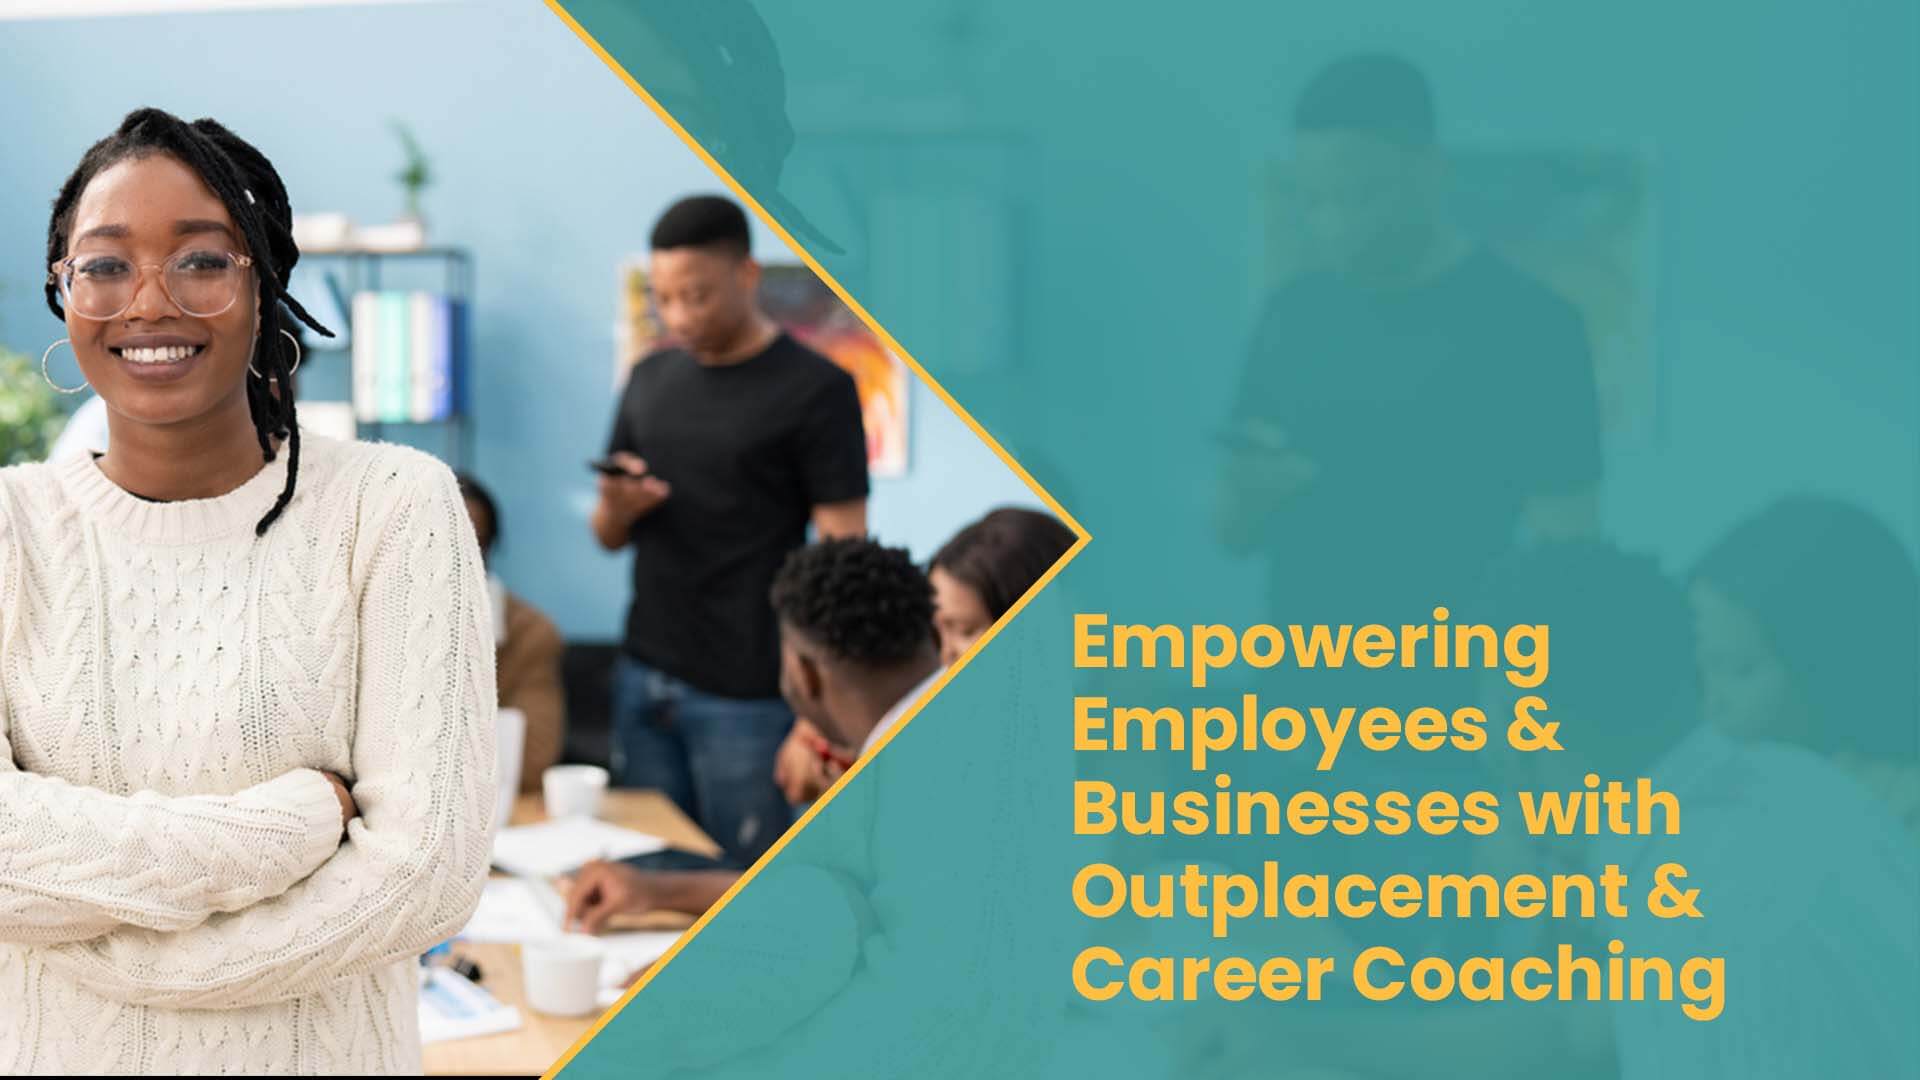 A banner on empowering employees and businesses with outplacement and career coaching